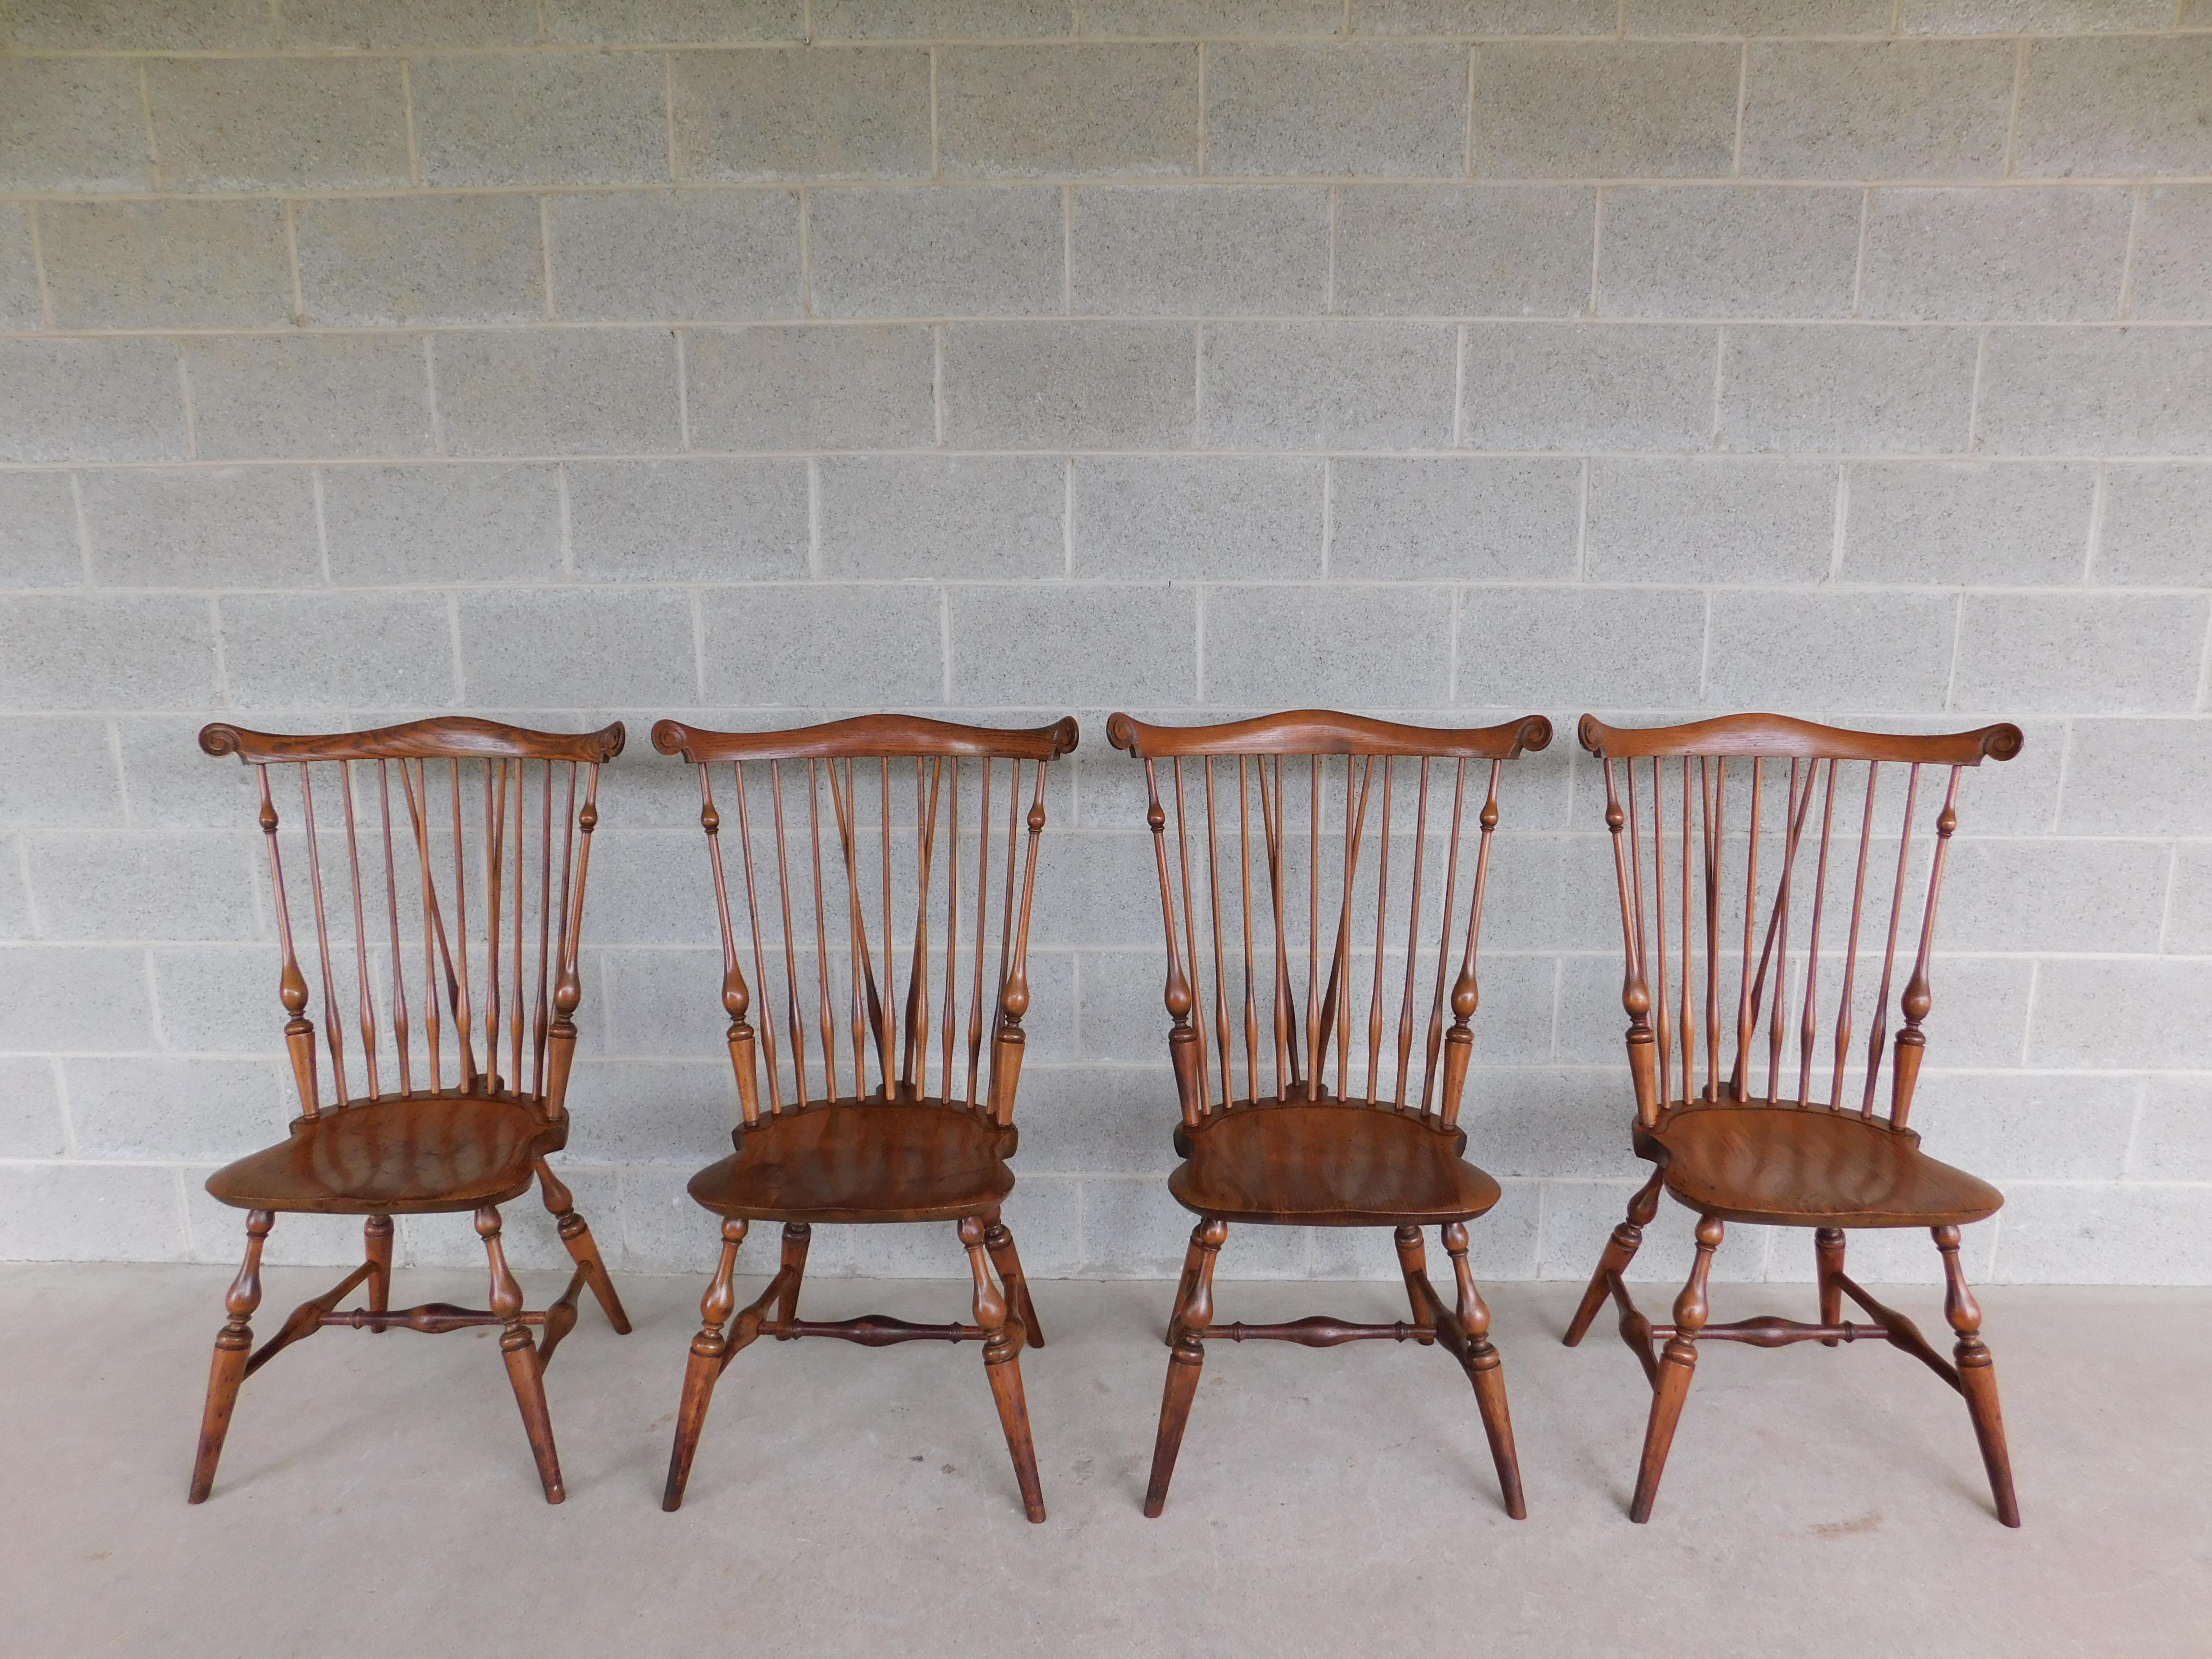 Wallace Nutting Brace Back Windsor Side Chairs #326 - Set of 4

Circa 1900 - 1925 Original Finish and Paper Label

Turned Legs, Various Hardwoods Used, Sturdy Construction

Back Height 40.5